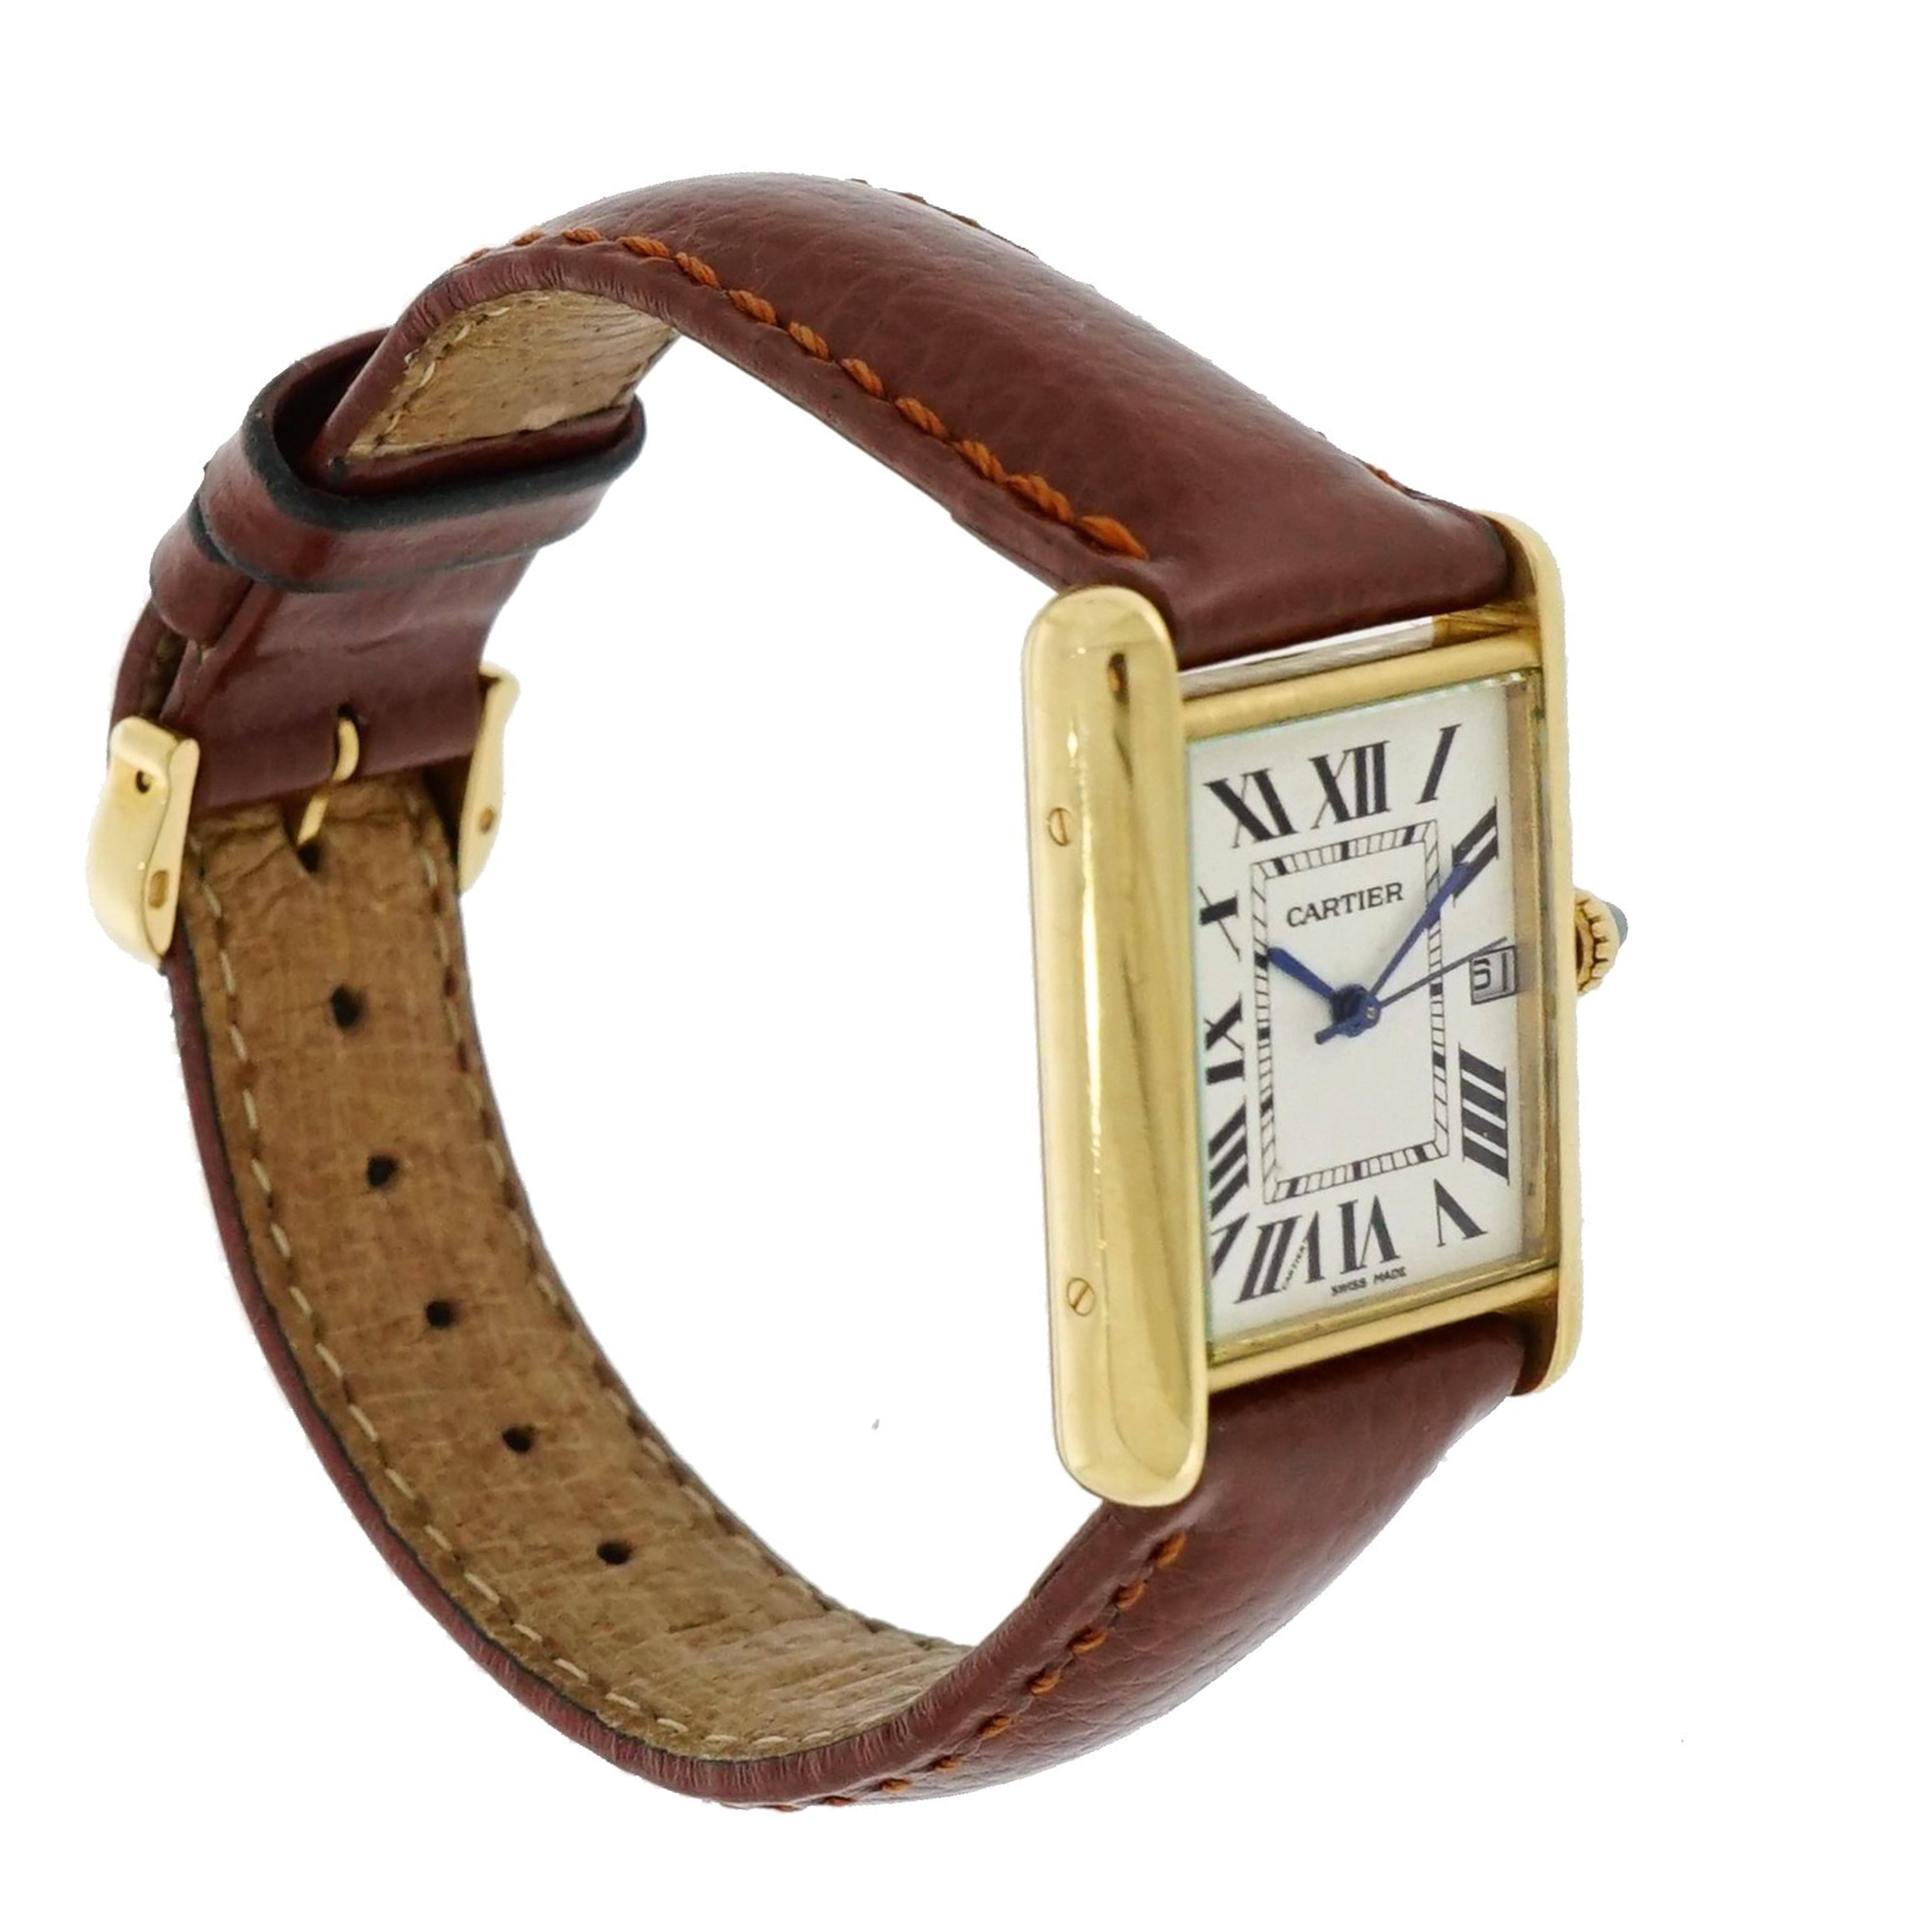 Cartier Tank Louis, the most wanted and most admired of all tank watches. With its smooth and rounded lines, became the jewel in the crown of the entire Cartier collection.
Crafted in 18k Yellow Gold with Brown Strap featuring a Quartz movement.